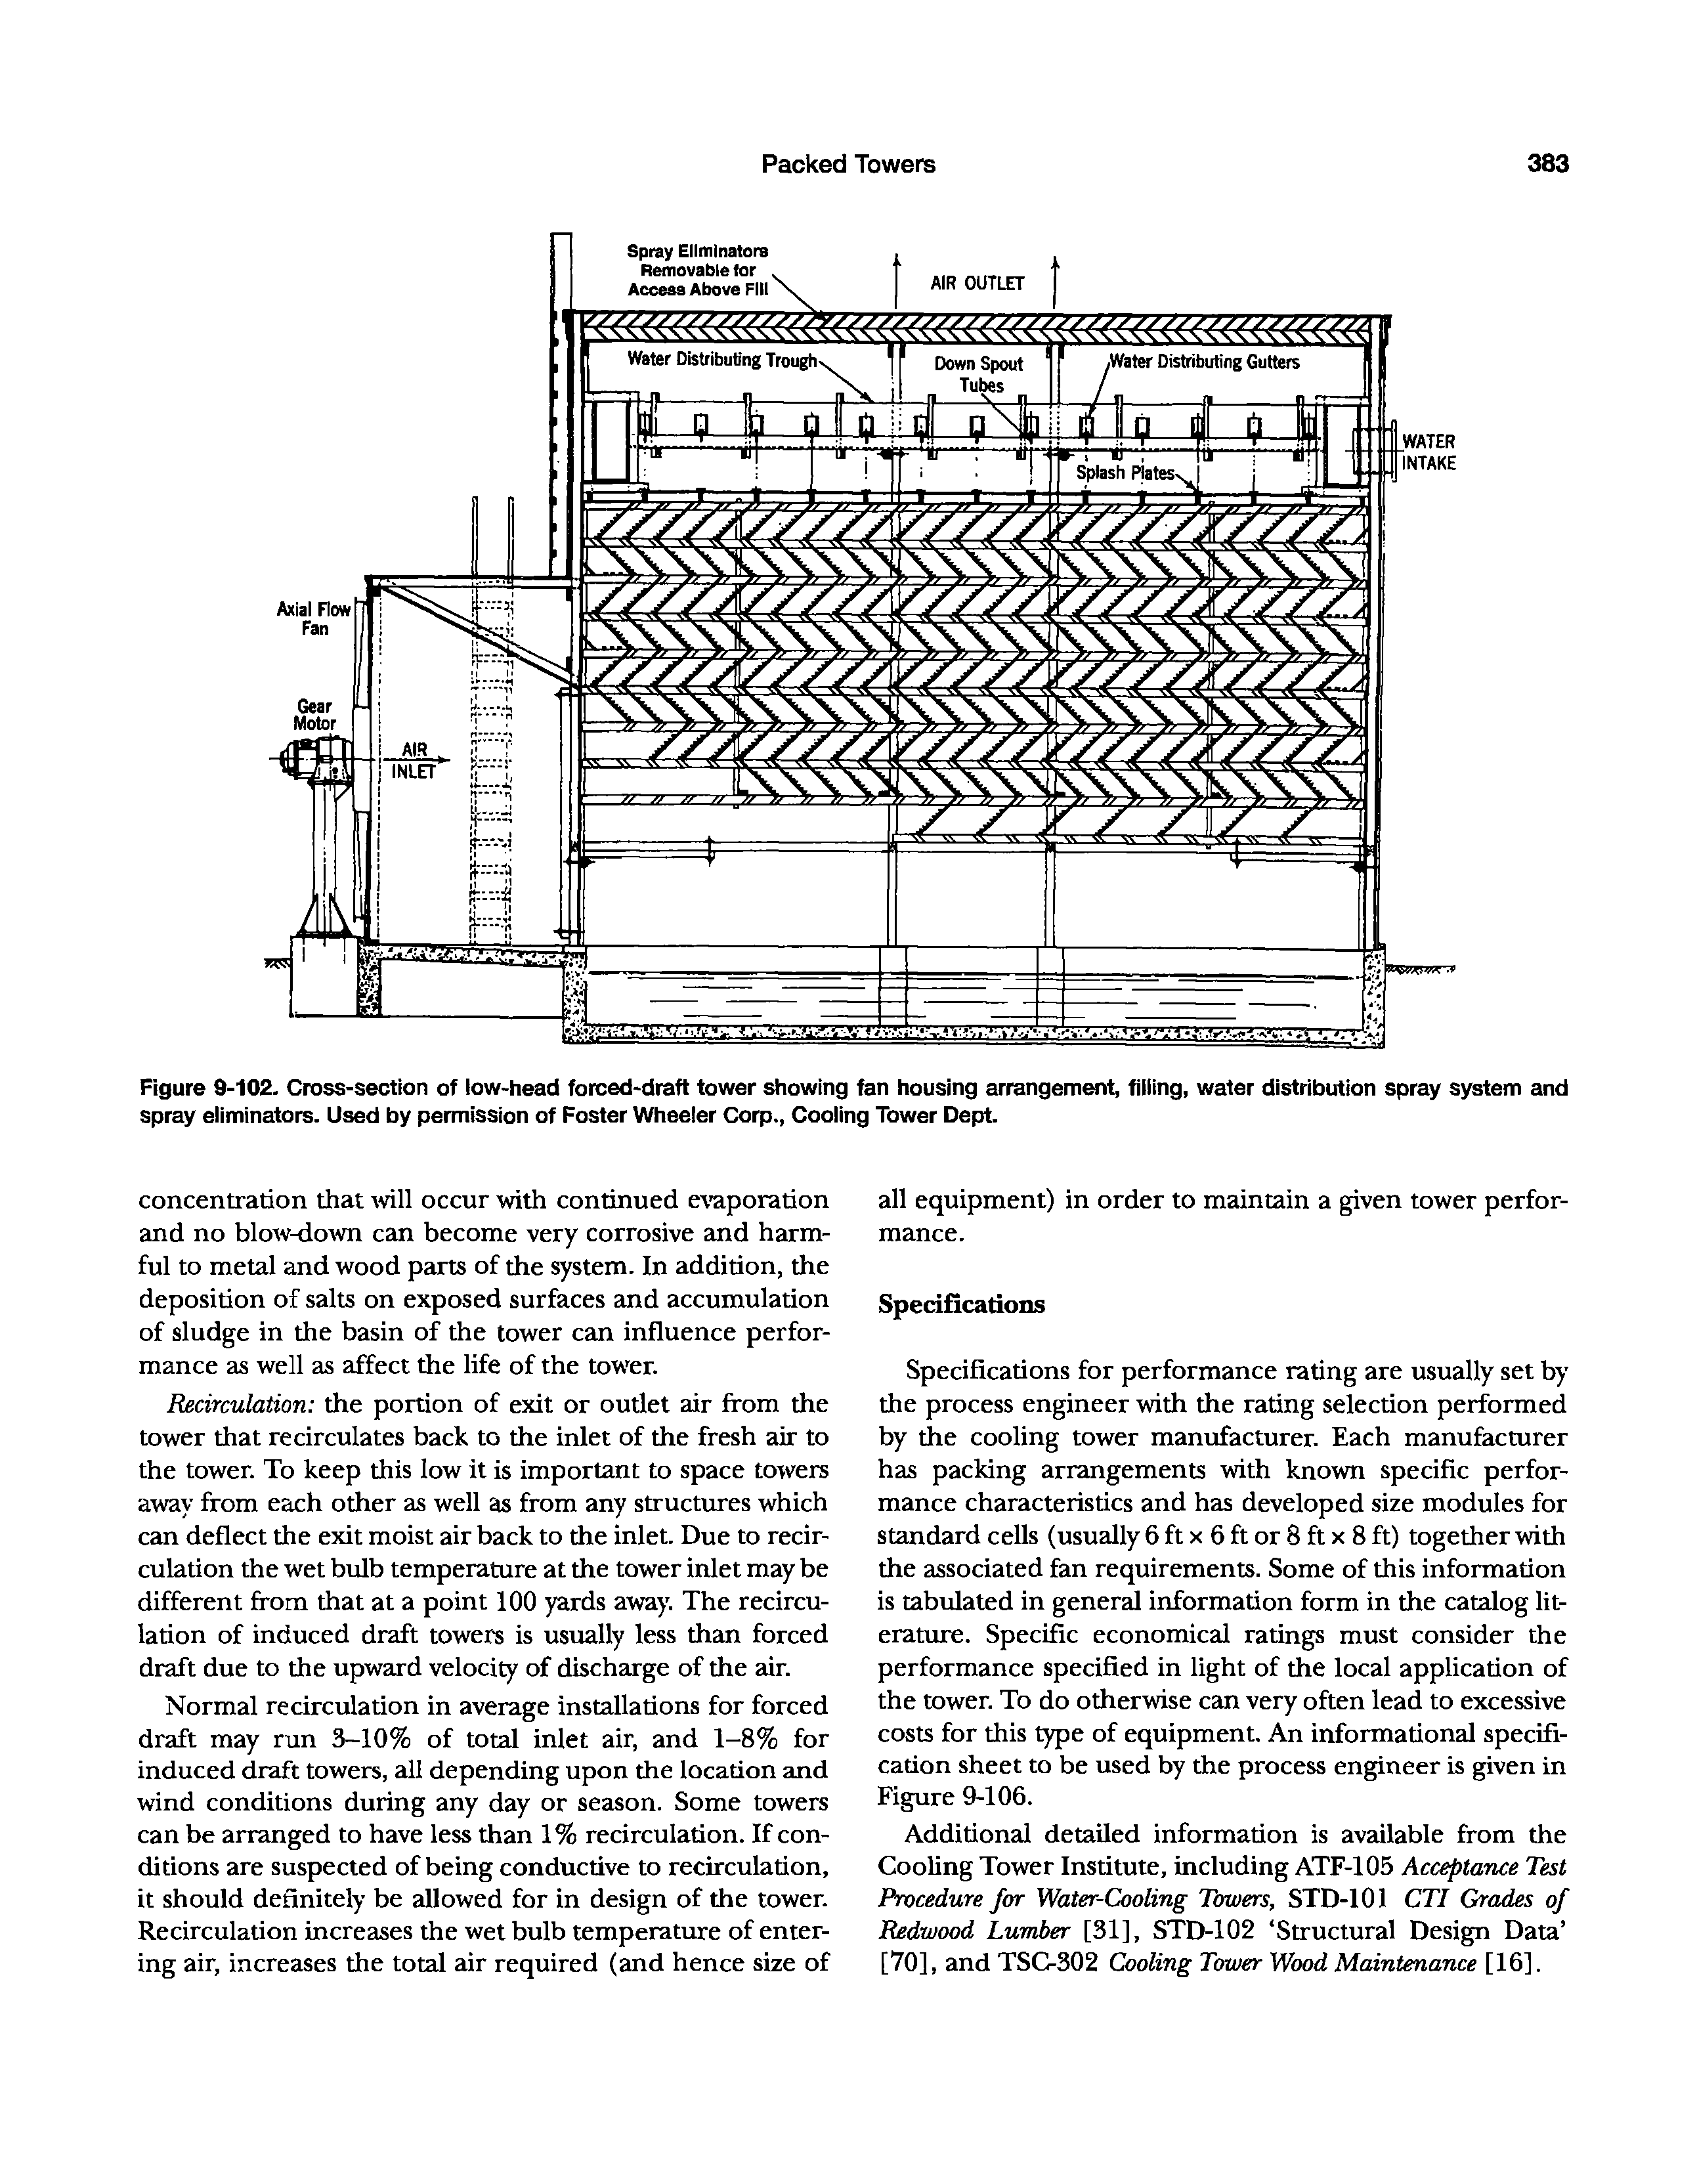 Figure 9-102. Cross-section of iow-head forced-draft tower showing fan housing arrangement, fiiling, water distribution spray system and spray eliminators. Used by permission of Foster Wheeler Corp., Cooling Tower Dept.